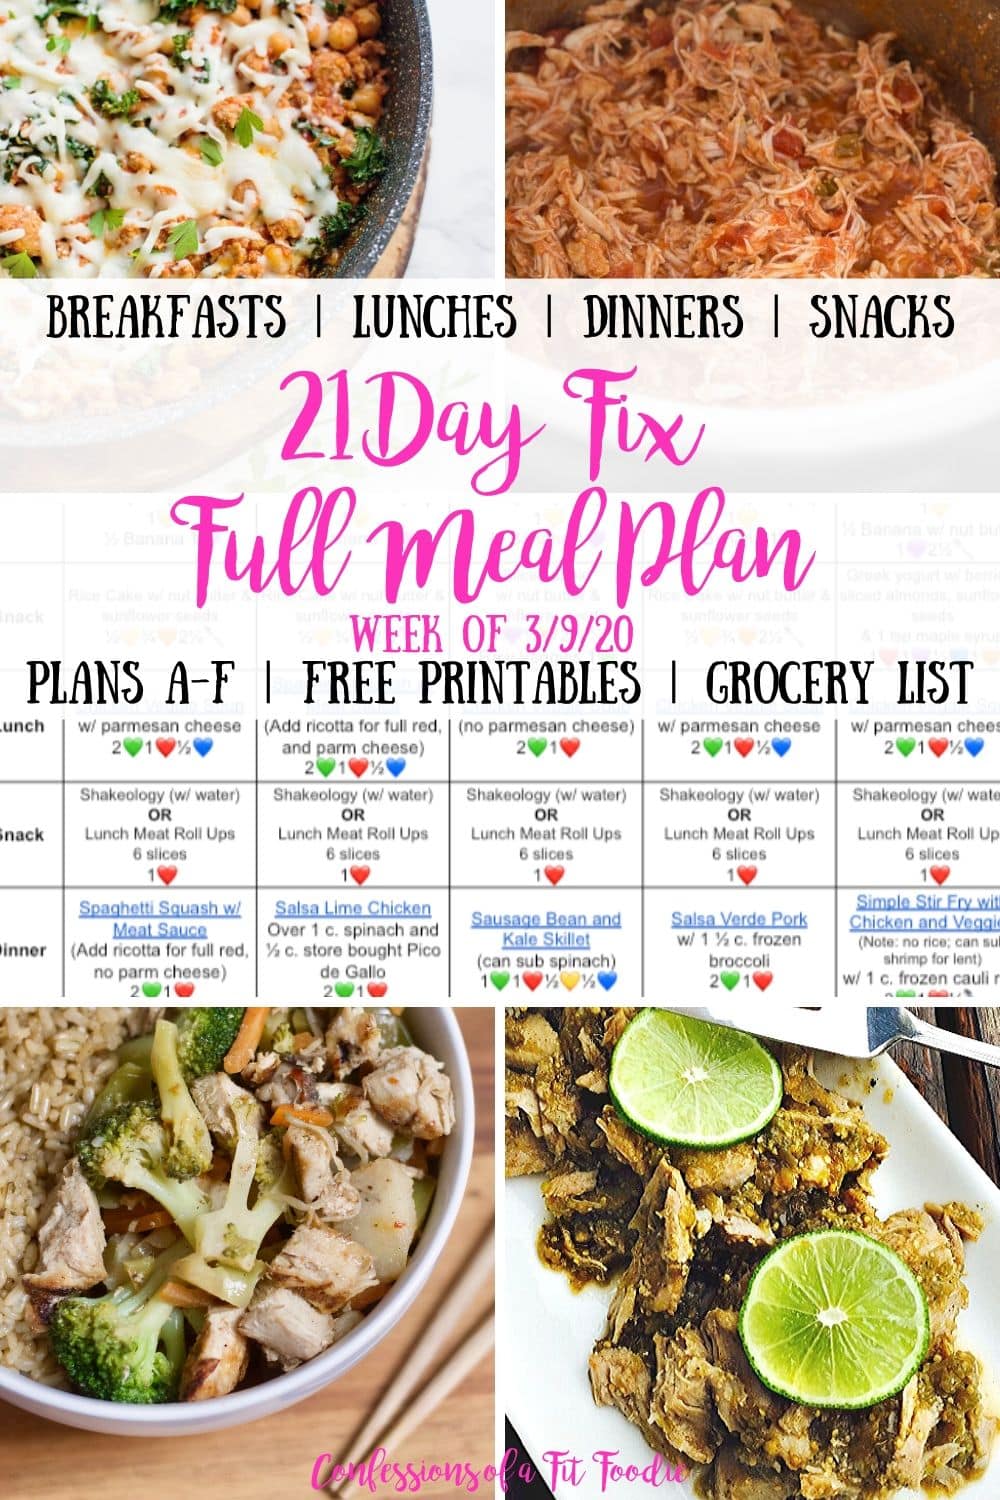 21 Day Fix Container Sizes - Carrie Elle